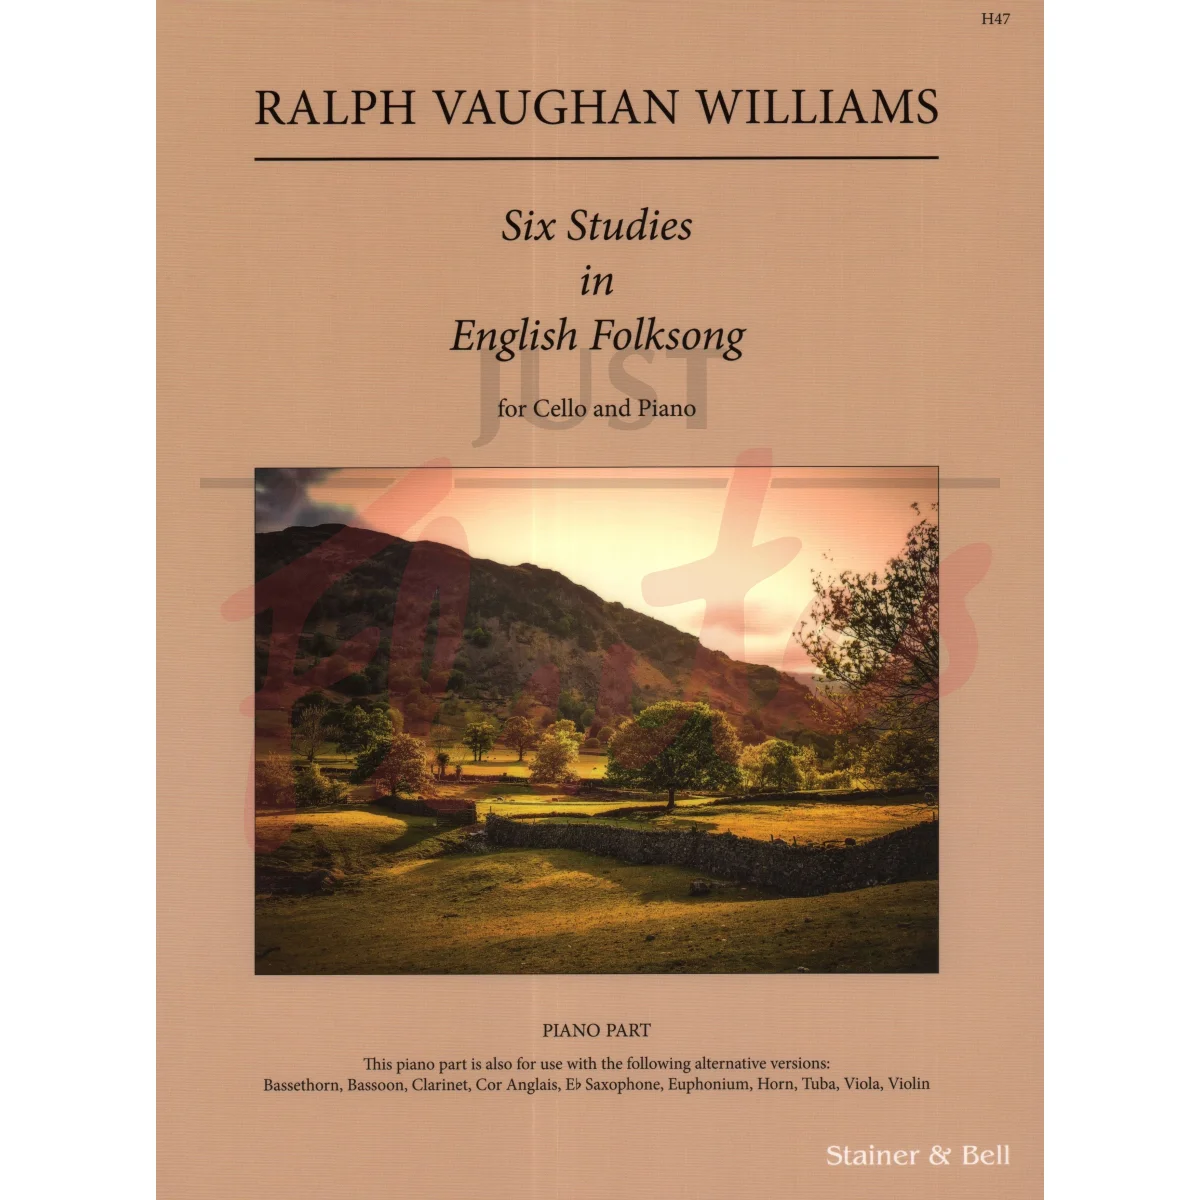 Six Studies in English FolkSong - Piano Accompaniment part